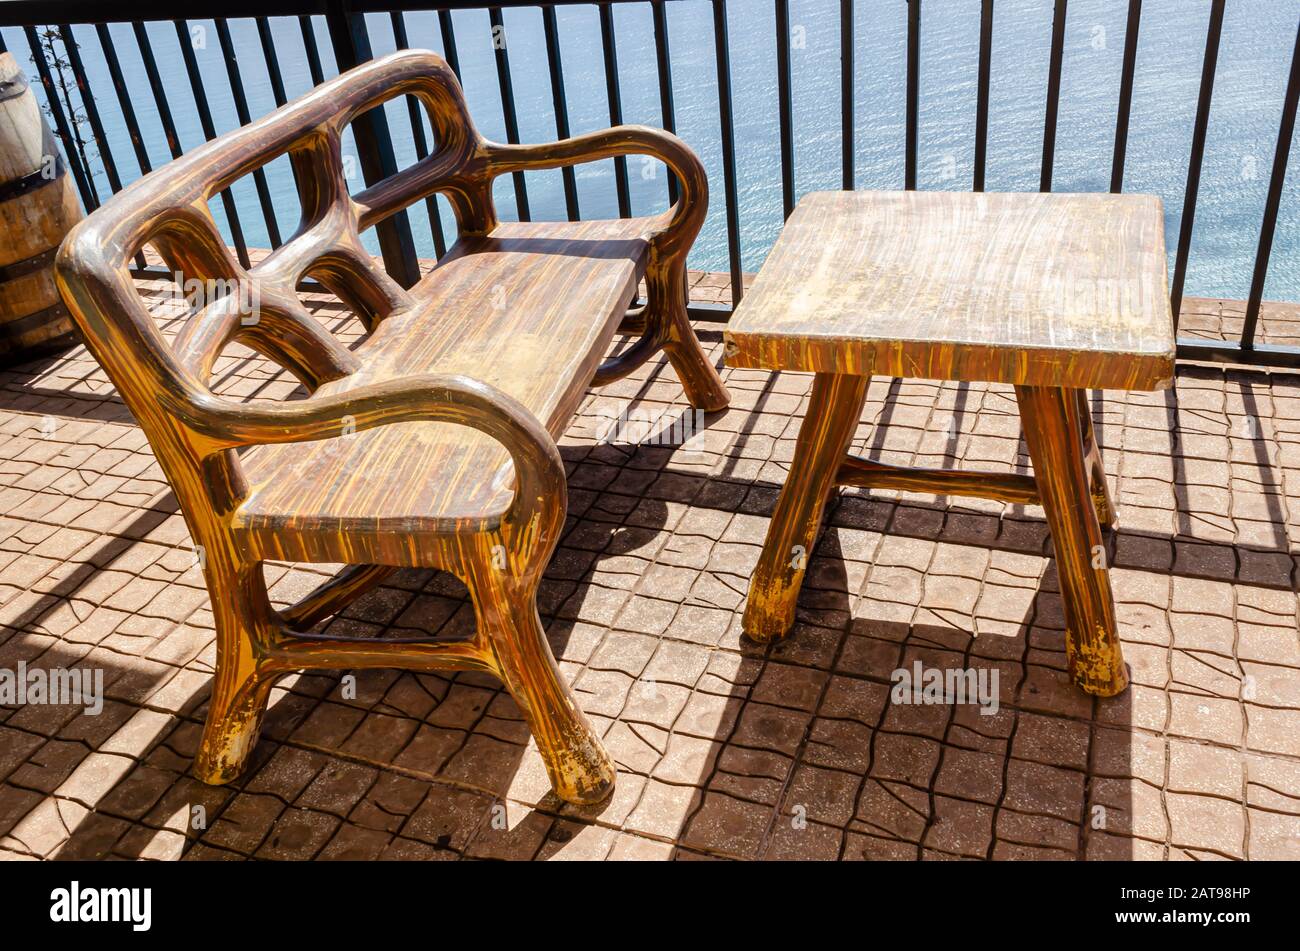 Top View Of Concrete Table And Chair On Sunny Porch Stock Photo